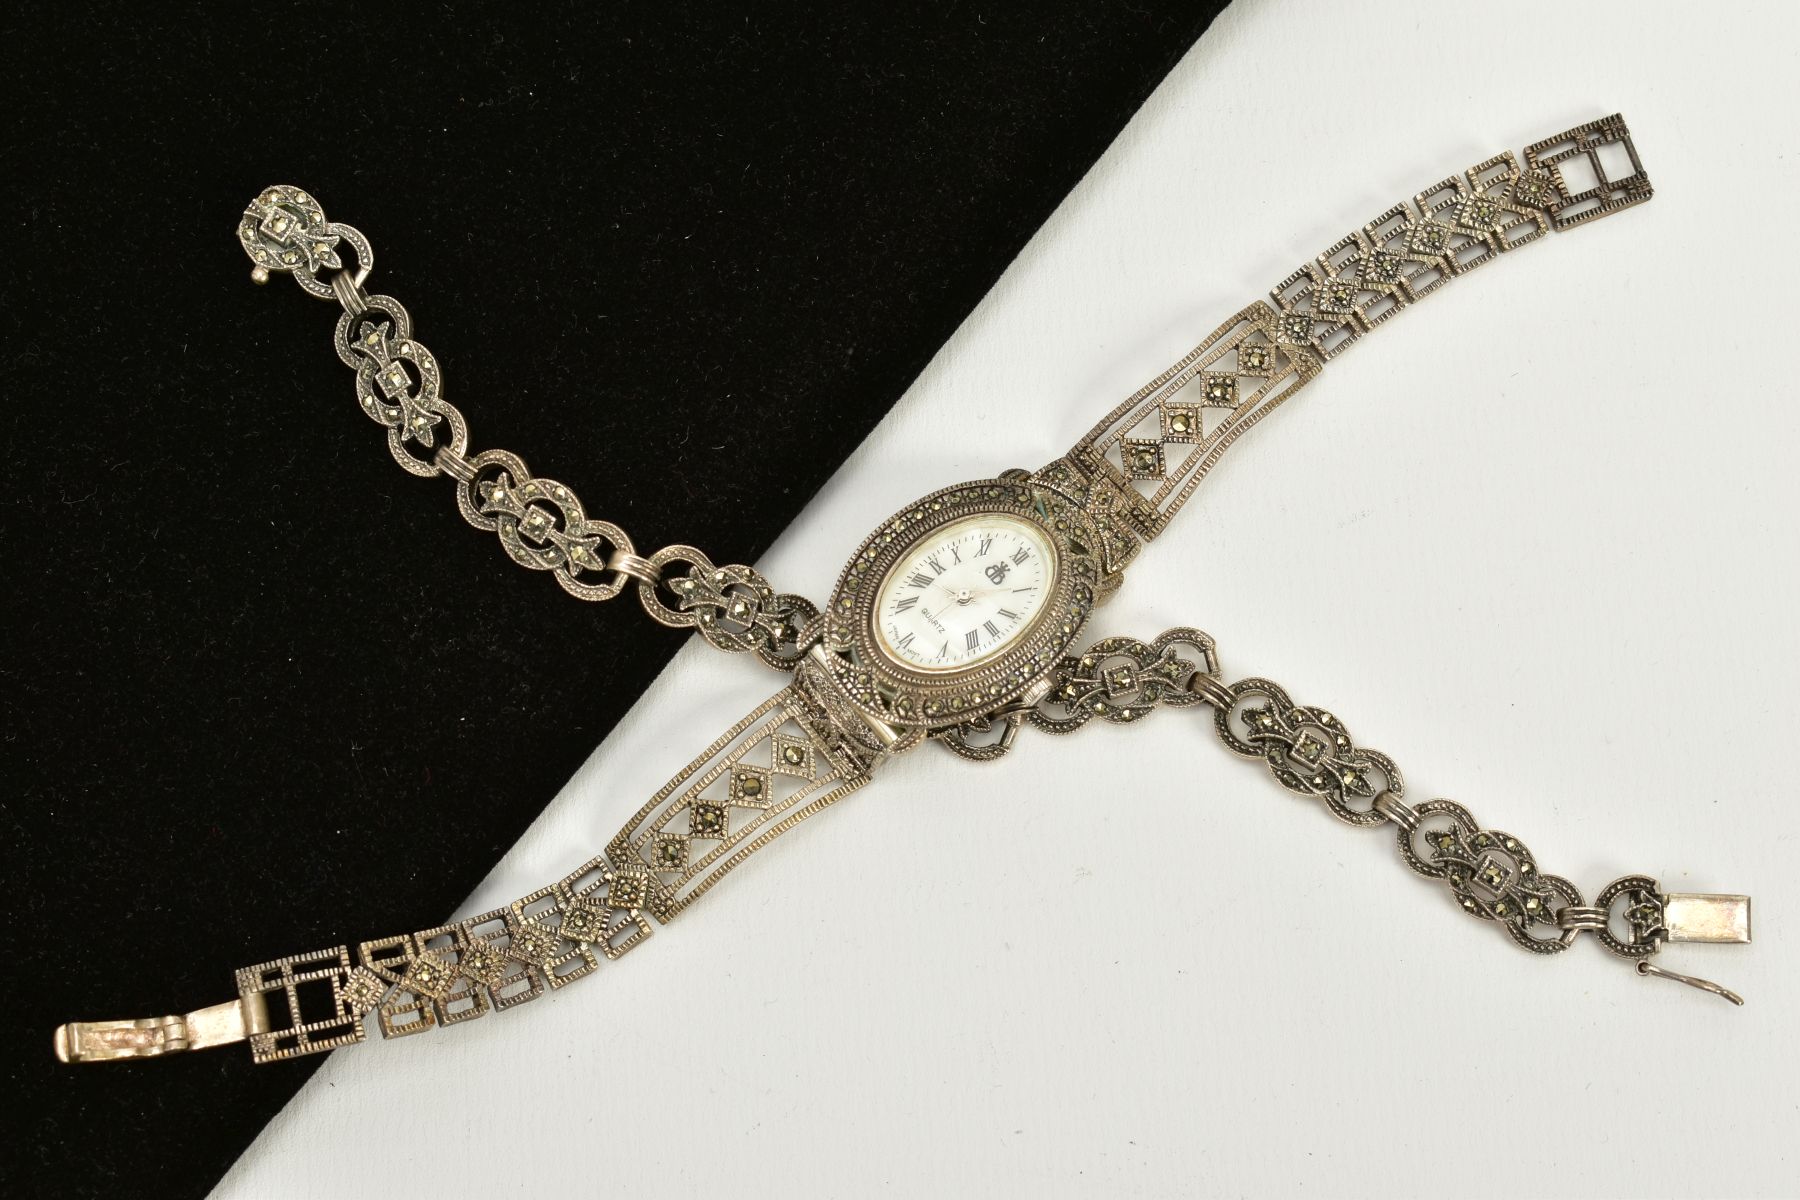 A LADIES SILVER MARCASITE WATCH AND BRACELET, the watch of oval design, white dial, Roman